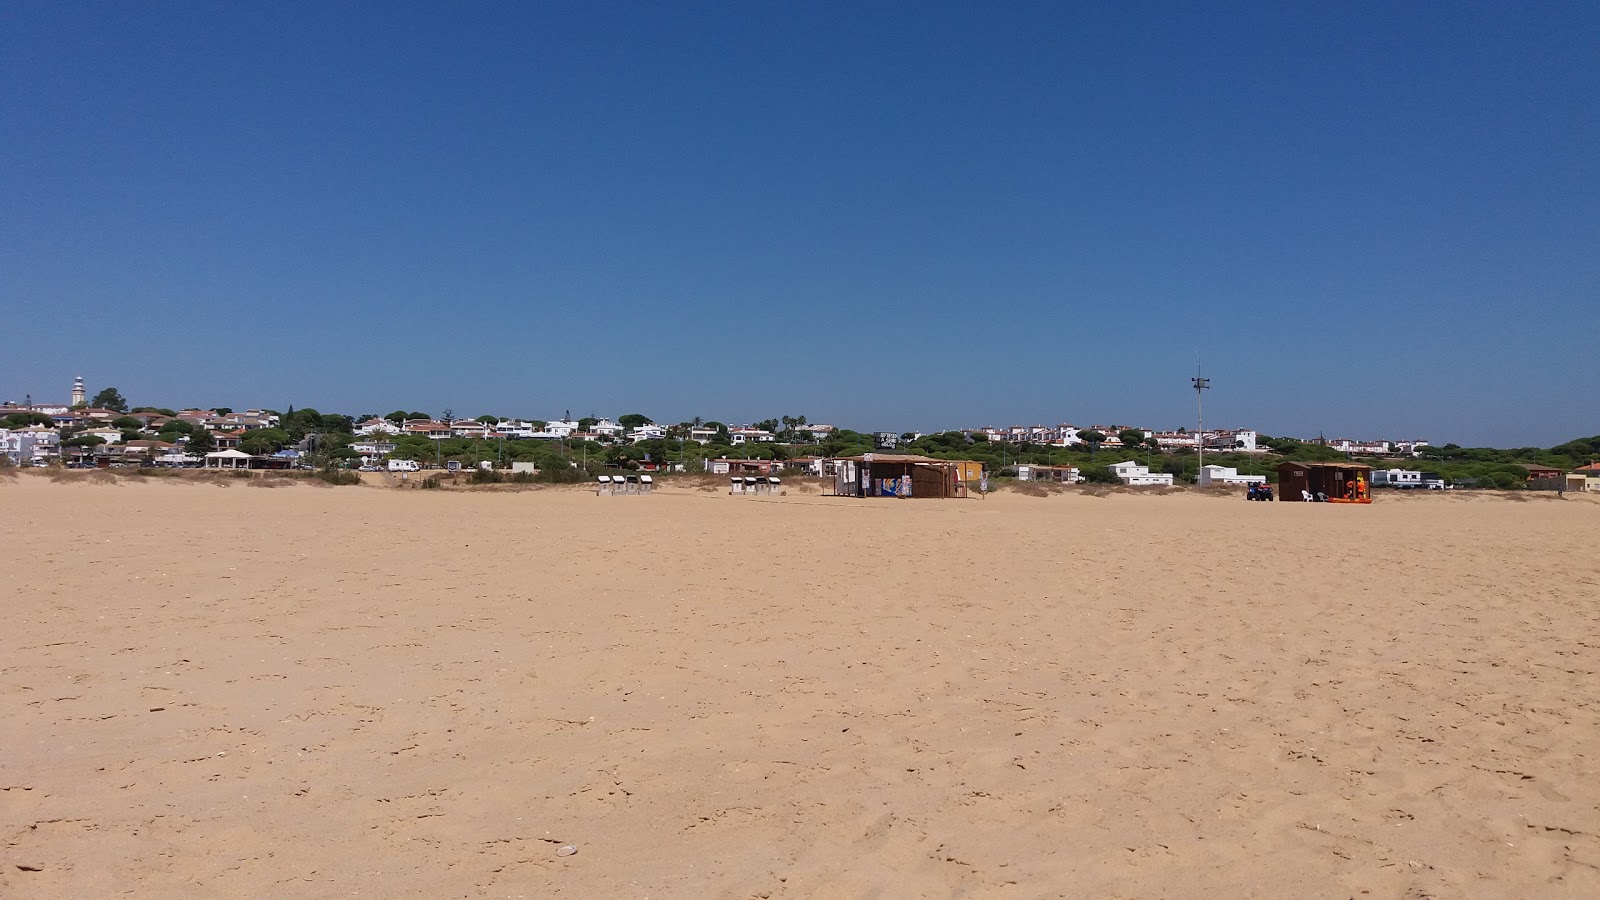 Photo of Mazagon Beach and the settlement